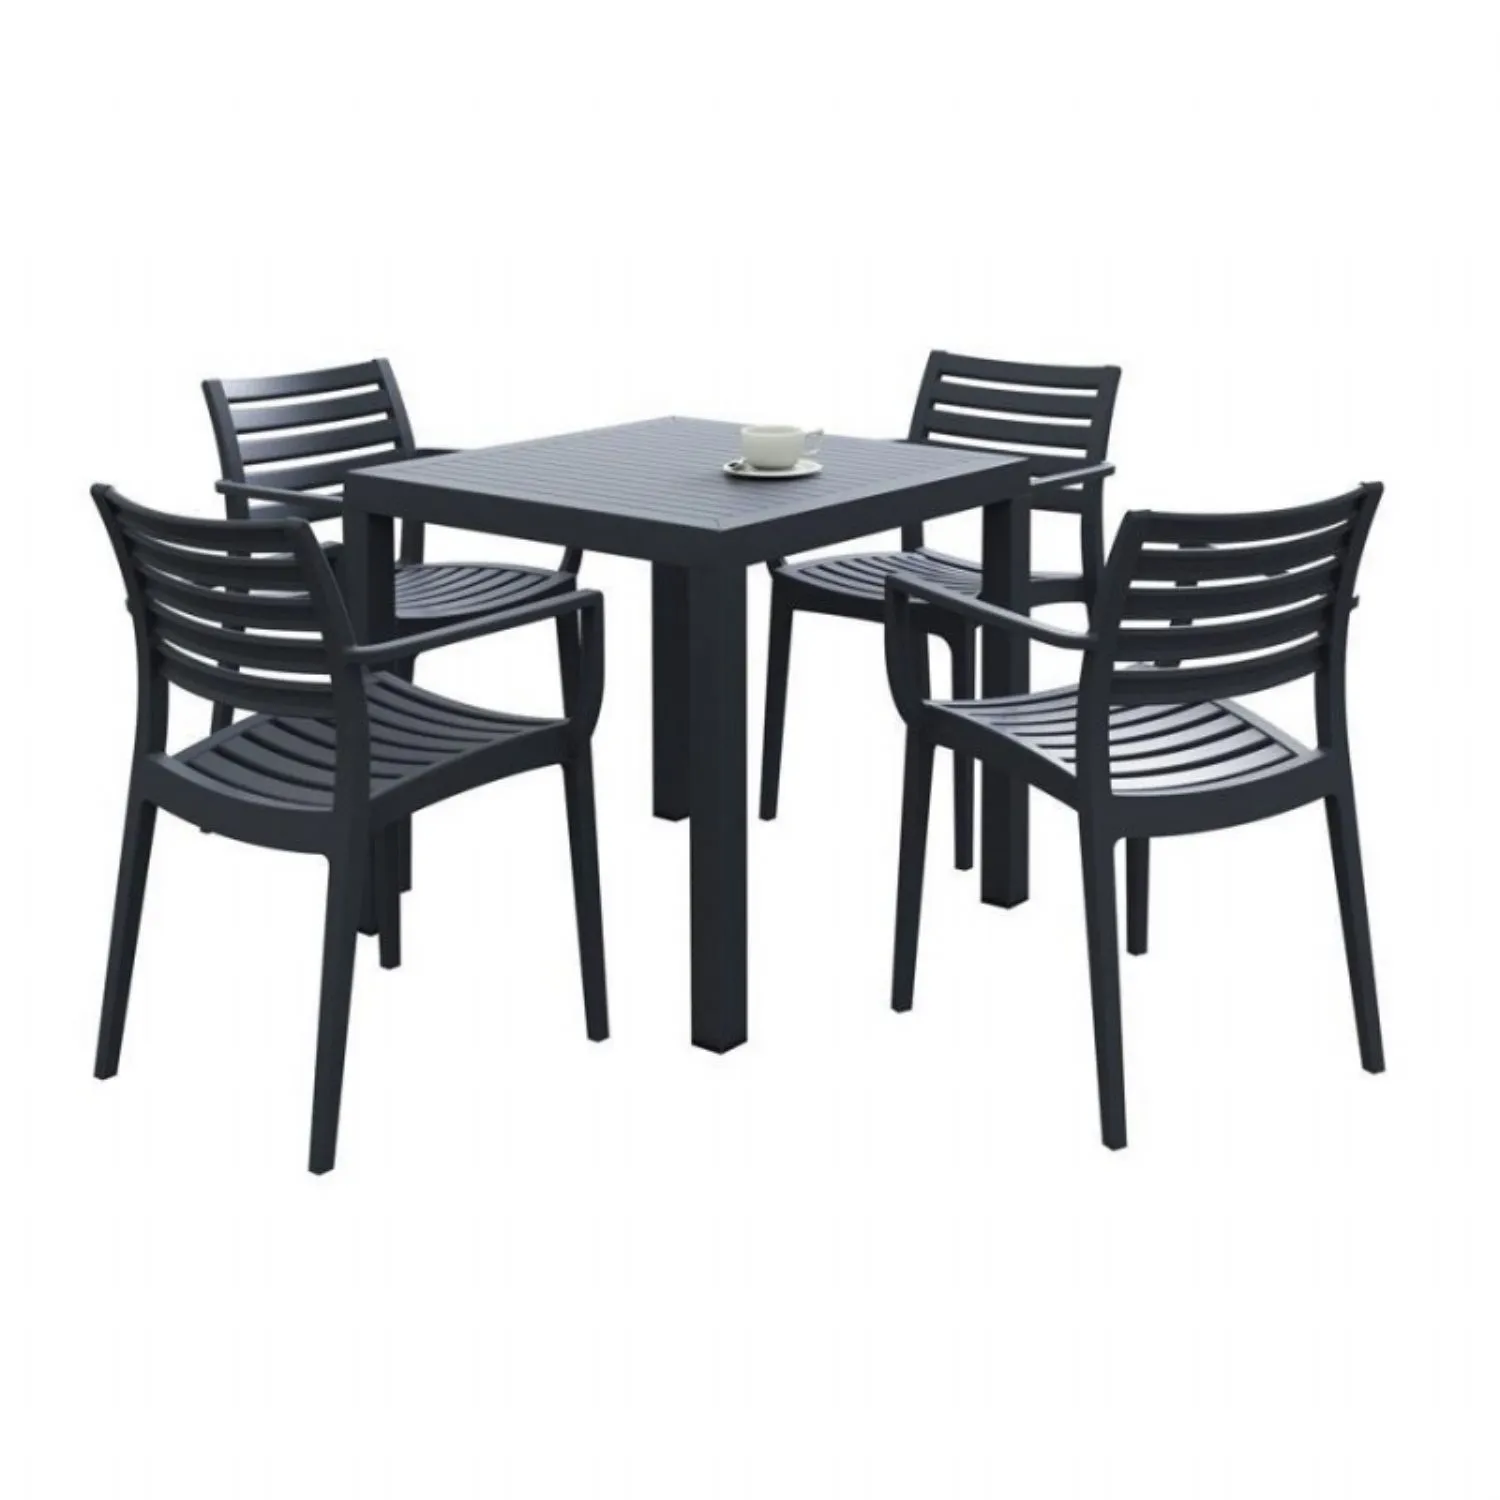 80cm Black Dining Table And 4 Armchairs Outdoor